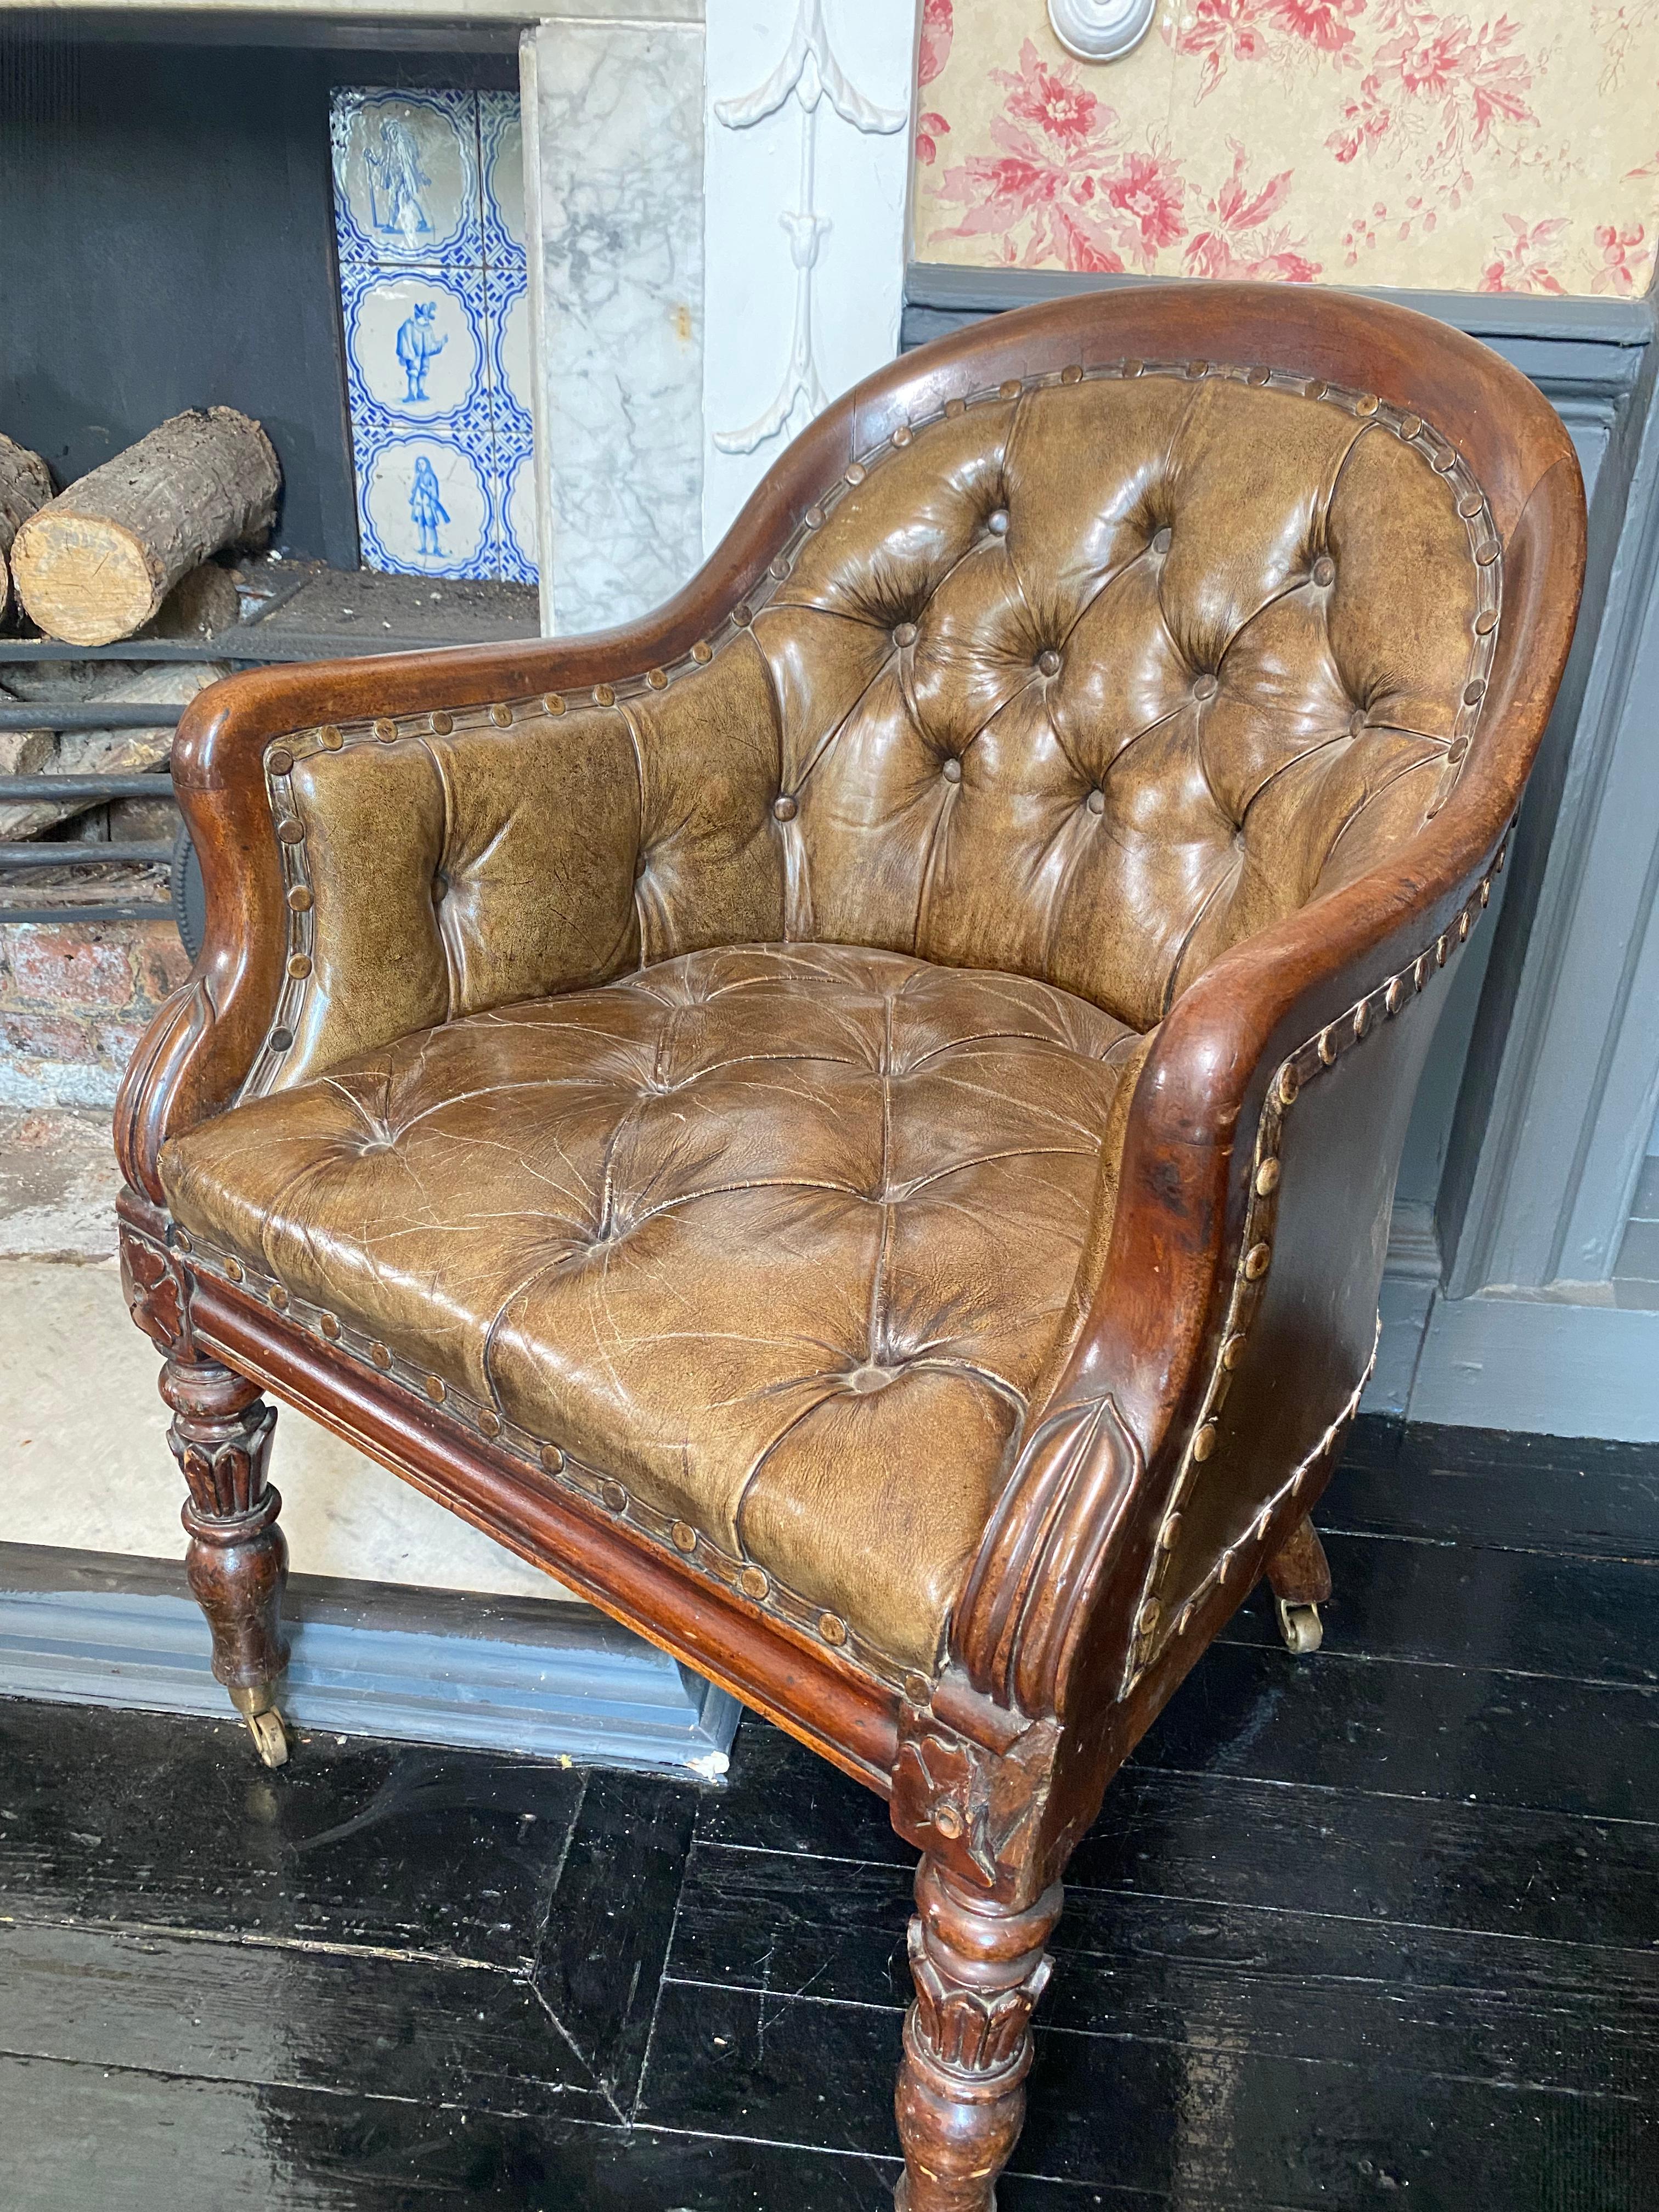 A wonderful and original pair of Georgian Library Tub chairs, beautifully patinated leather and studding.